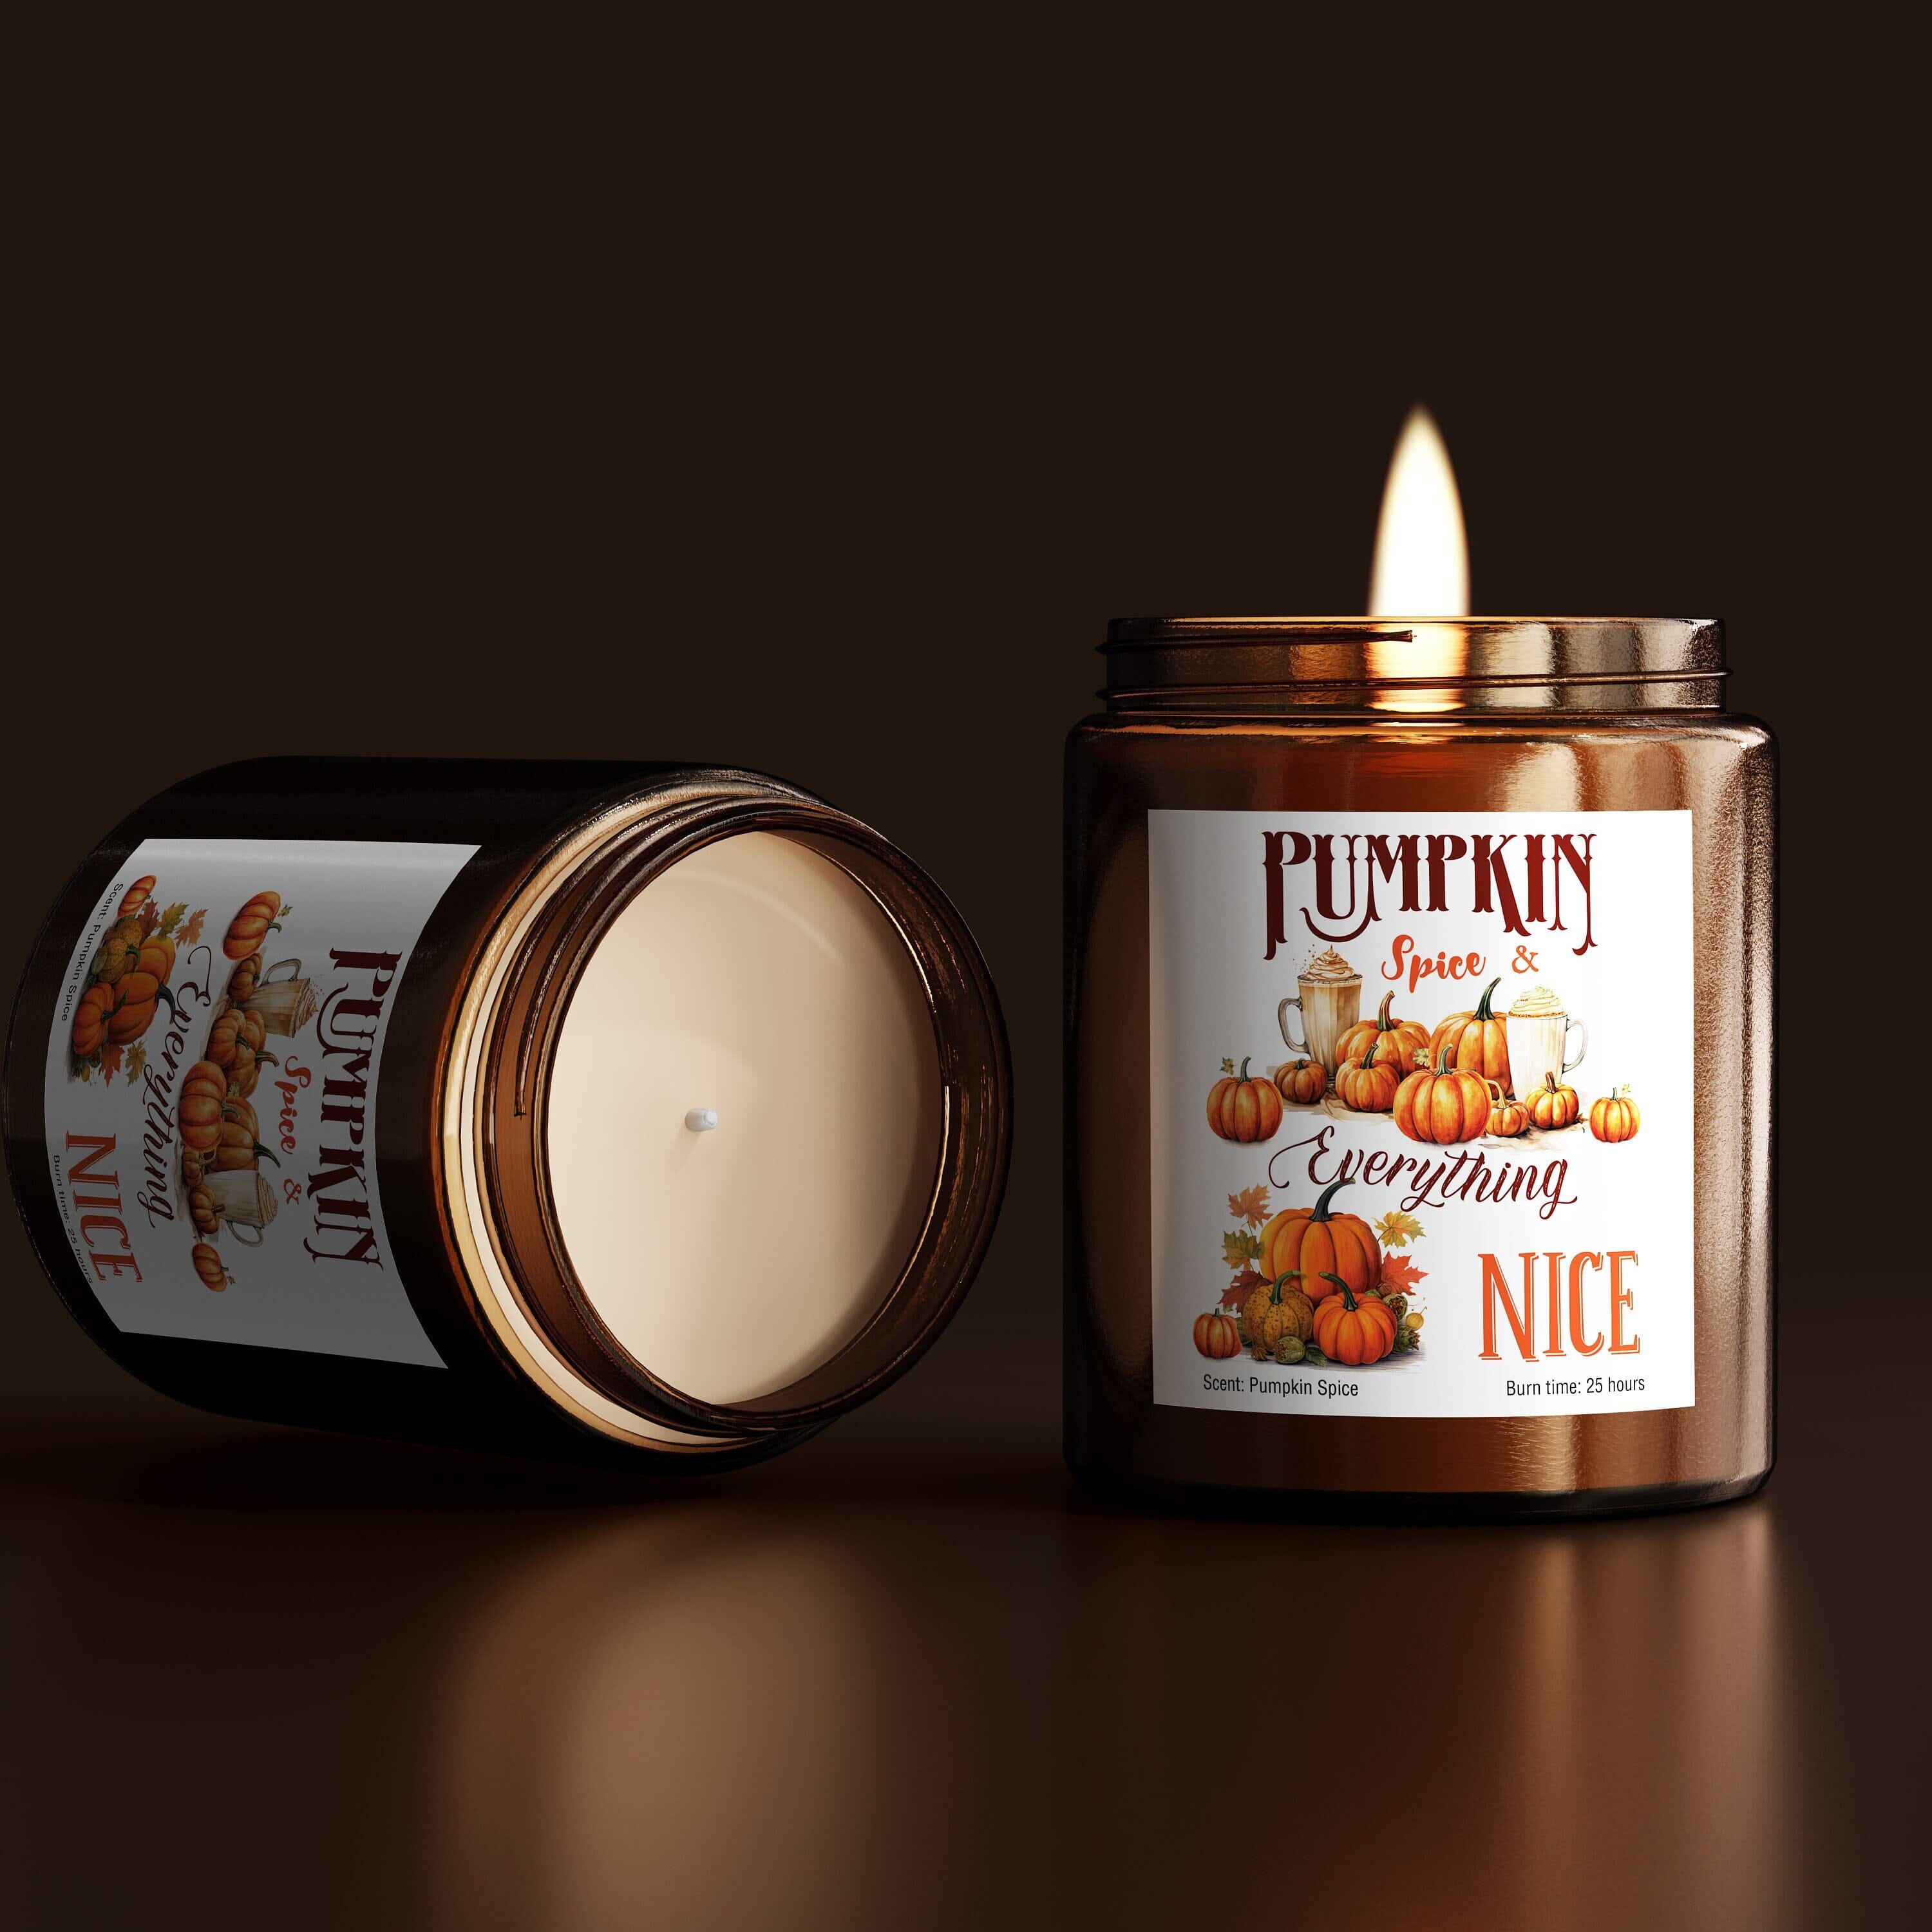 Pumpkin Spice Everything Nice Candle, Pumpkin Spice Scent, Cosy Autumn Gift for Friends Mum Dad Grandma Home Décor